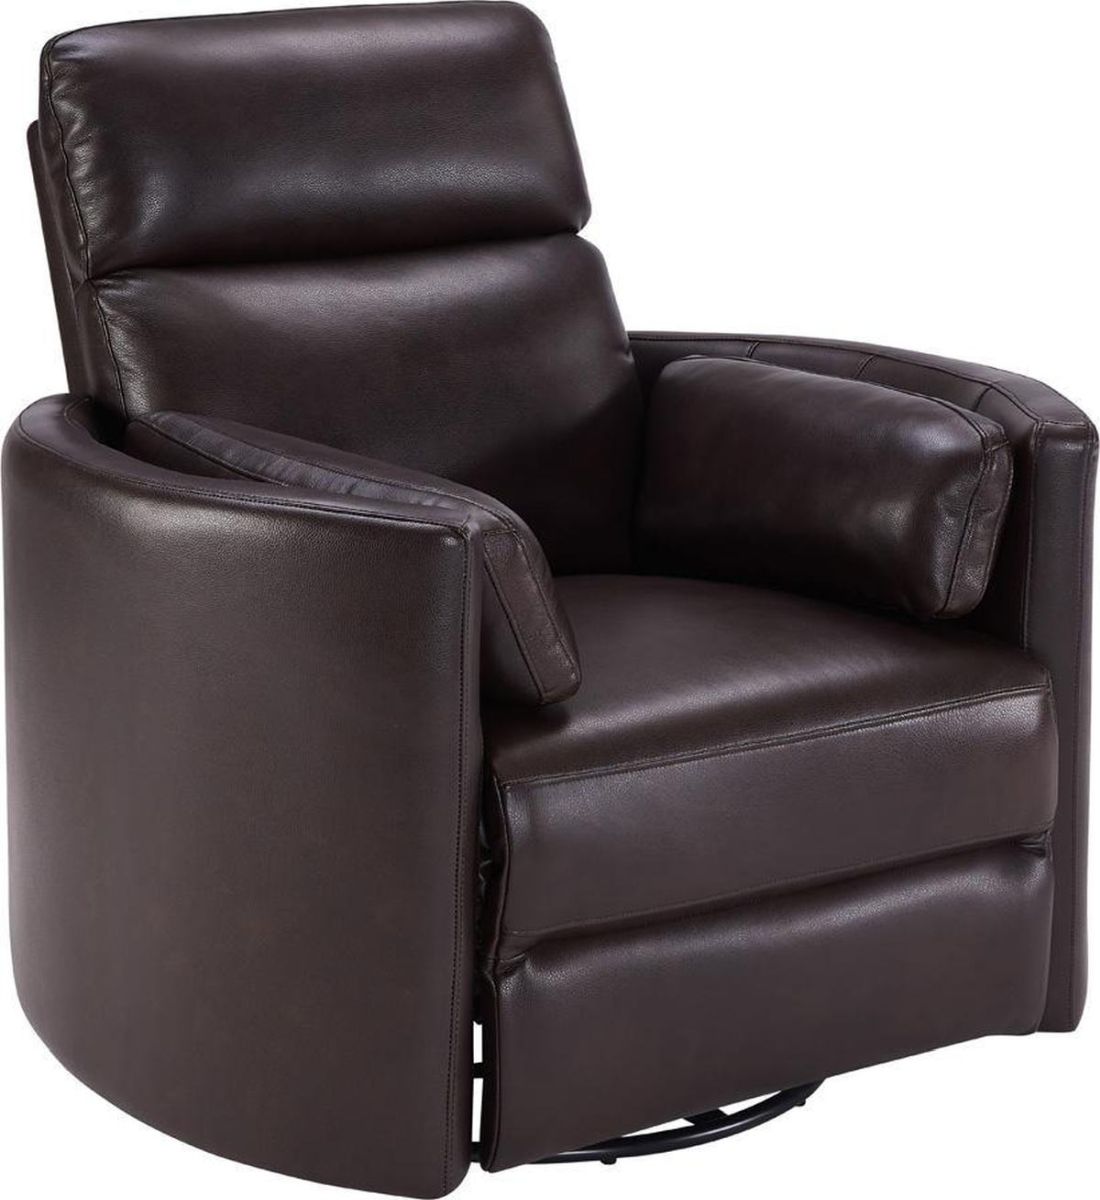 Parker House® Radius Florence Brown Leather Power Swivel Glider Recliner